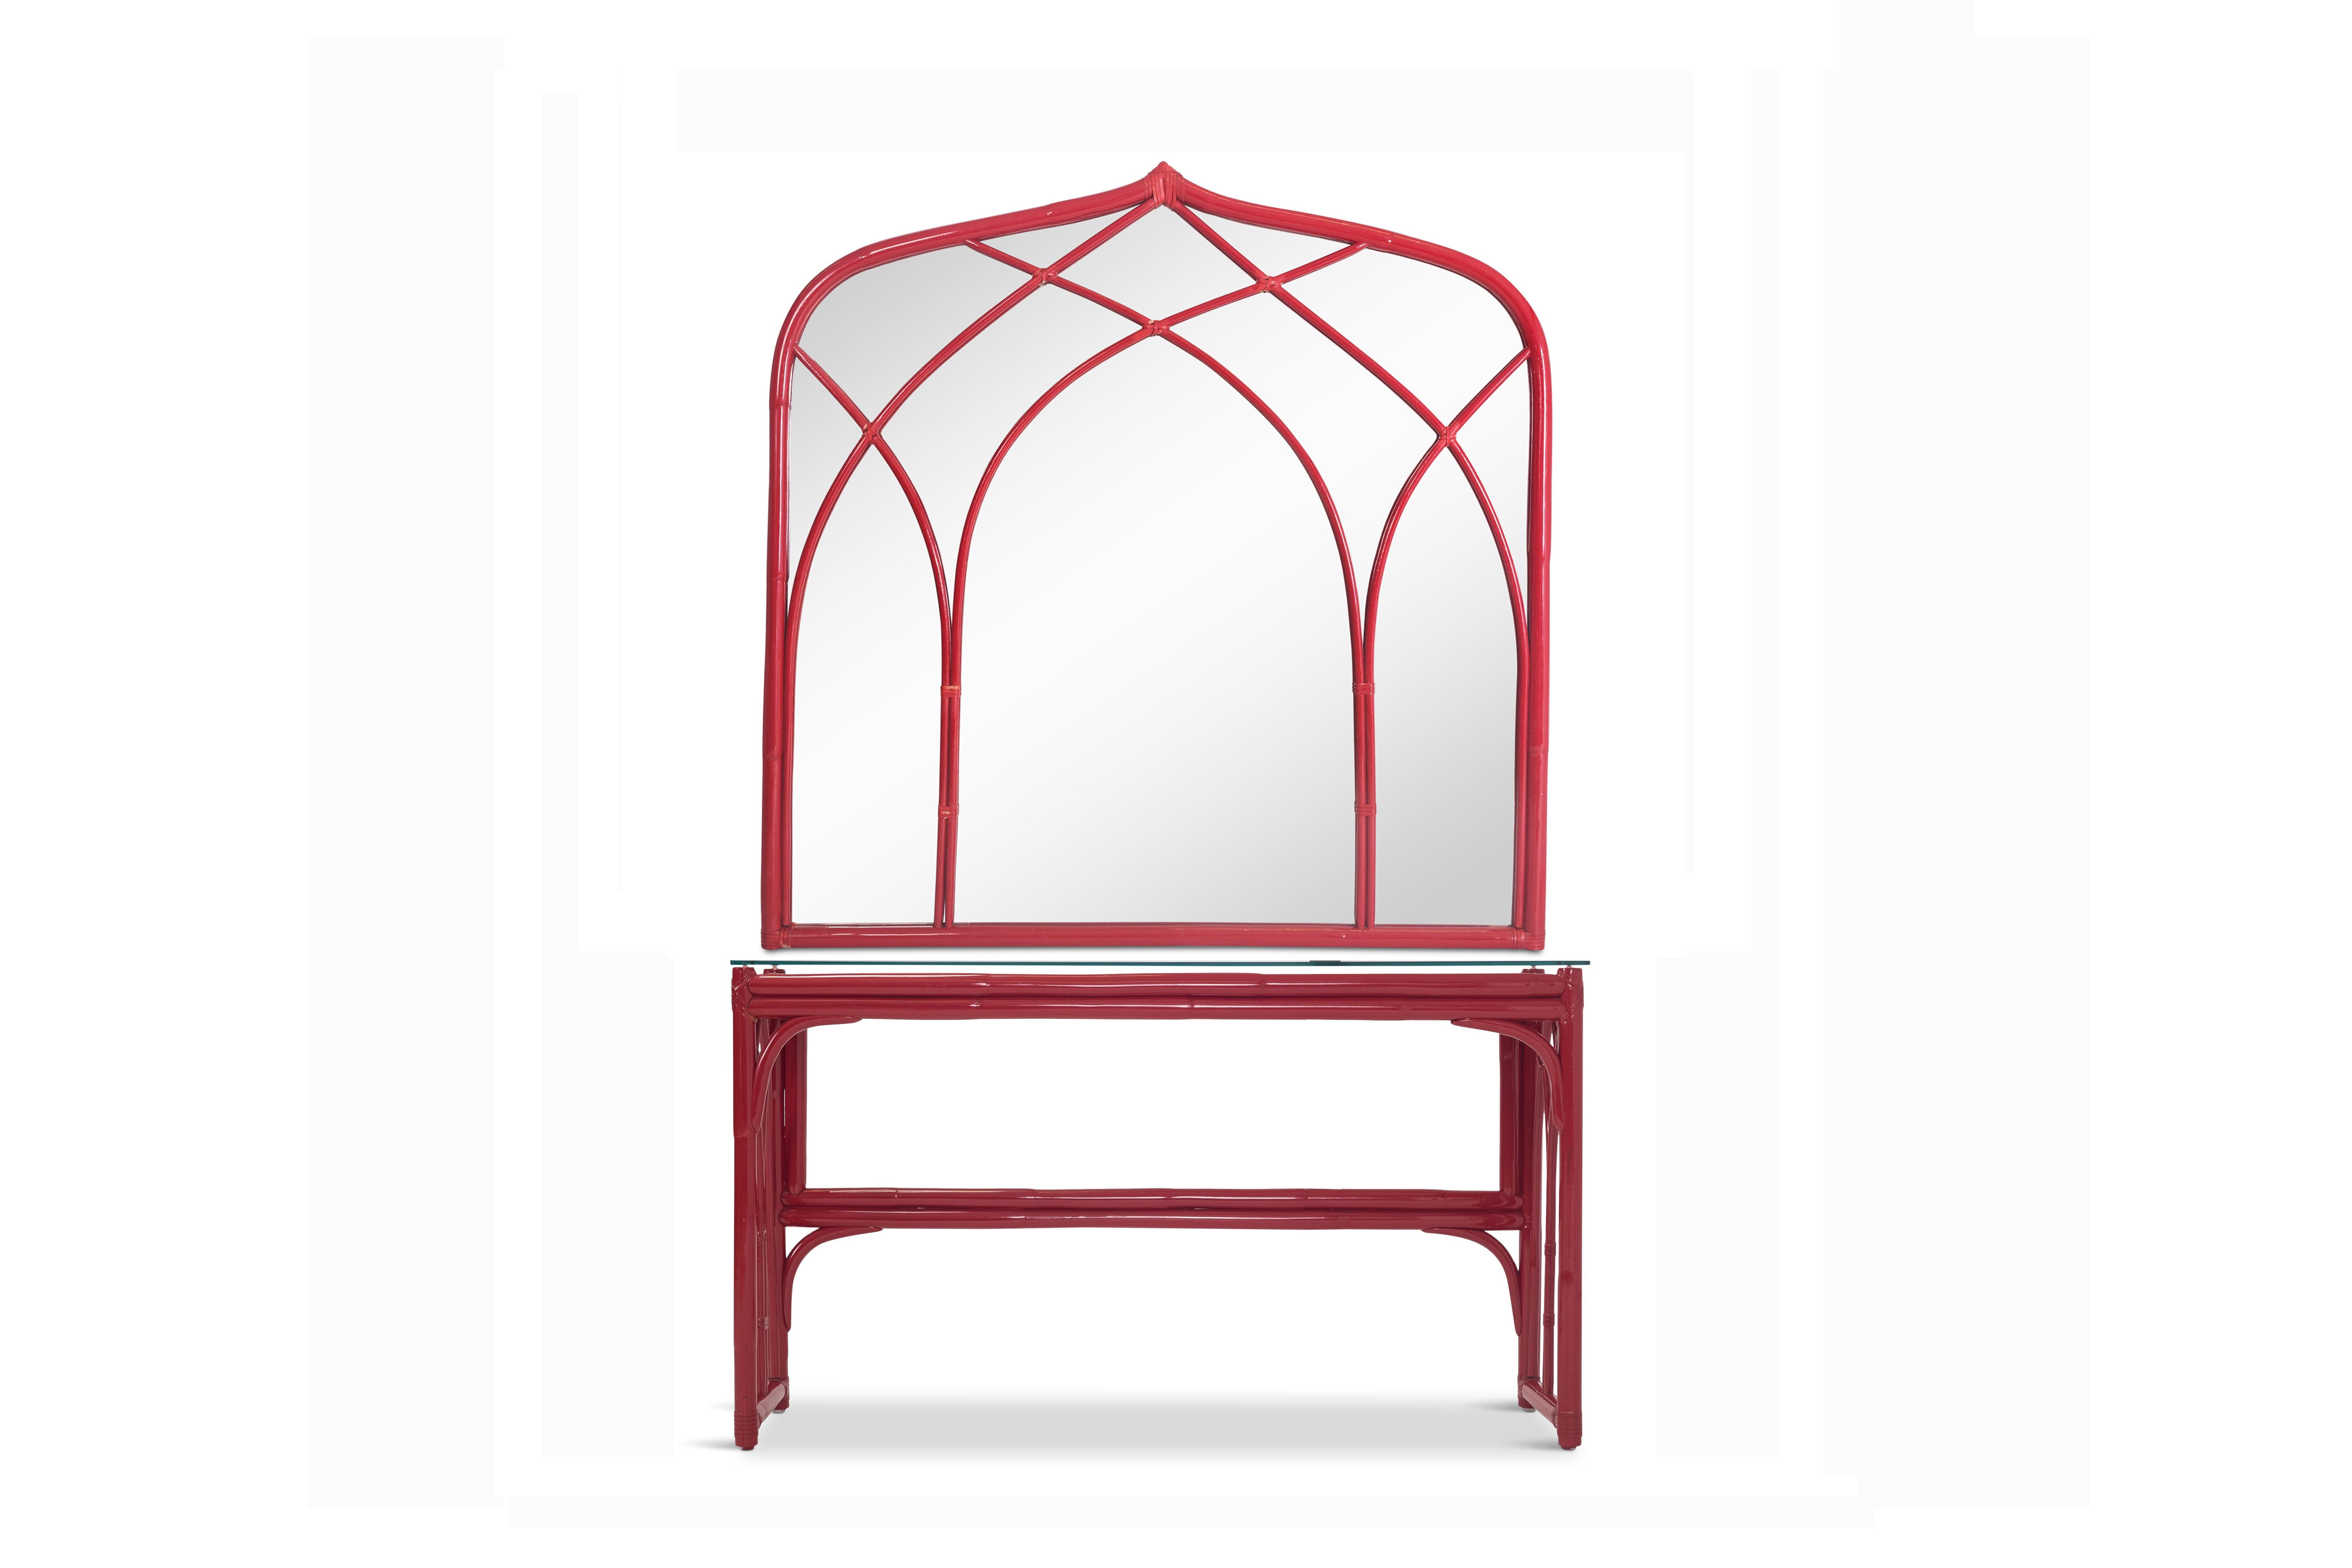 Regency red bamboo vanity table with rectangular glass top and large matching mirror. 
Both table and mirror show lot of decorative elements, making these items a true eye-catcher.

Red lacquer

Measures: Table: Depth 40 cm, width 131 cm,